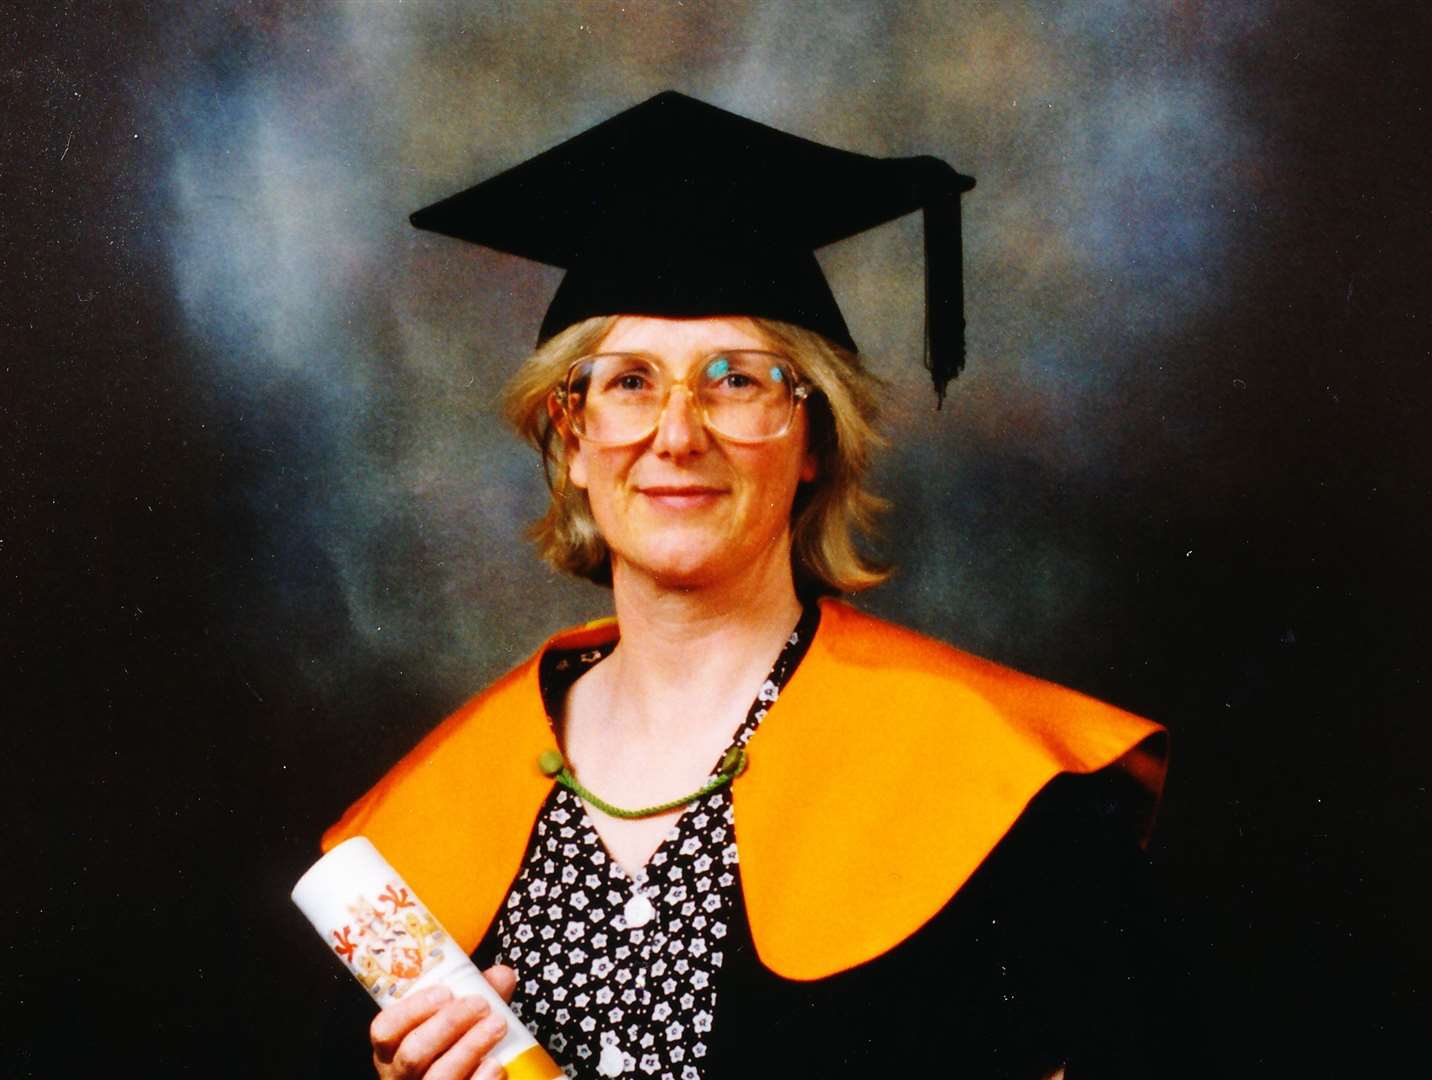 Faith Chantler pictured with her master's degree in English